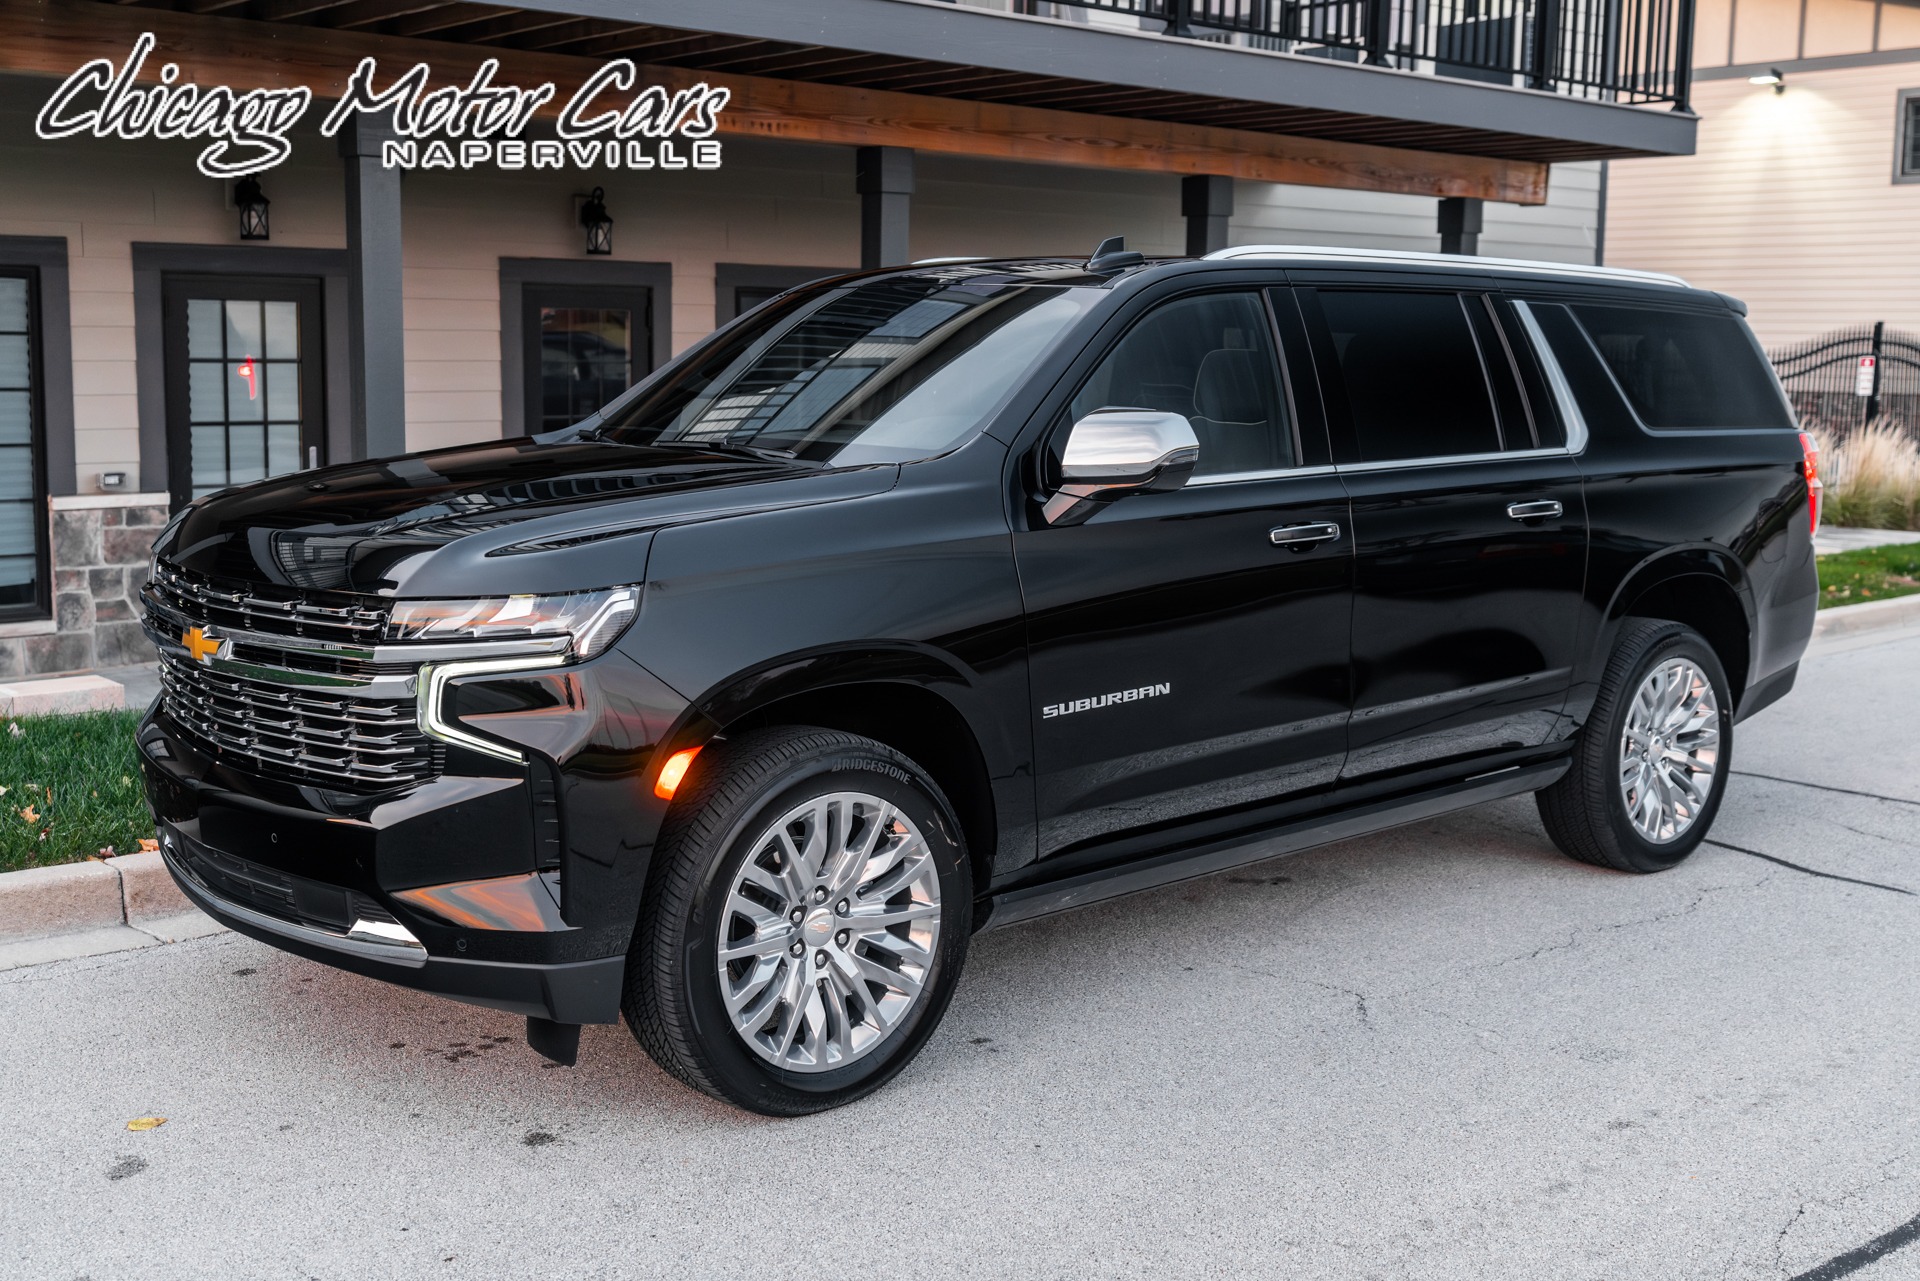 Used-2023-Chevrolet-Suburban-Premier-SUV-Pano-Sunroof-22-IN-wheels-Power-Side-Steps-ONLY-4k-Miles